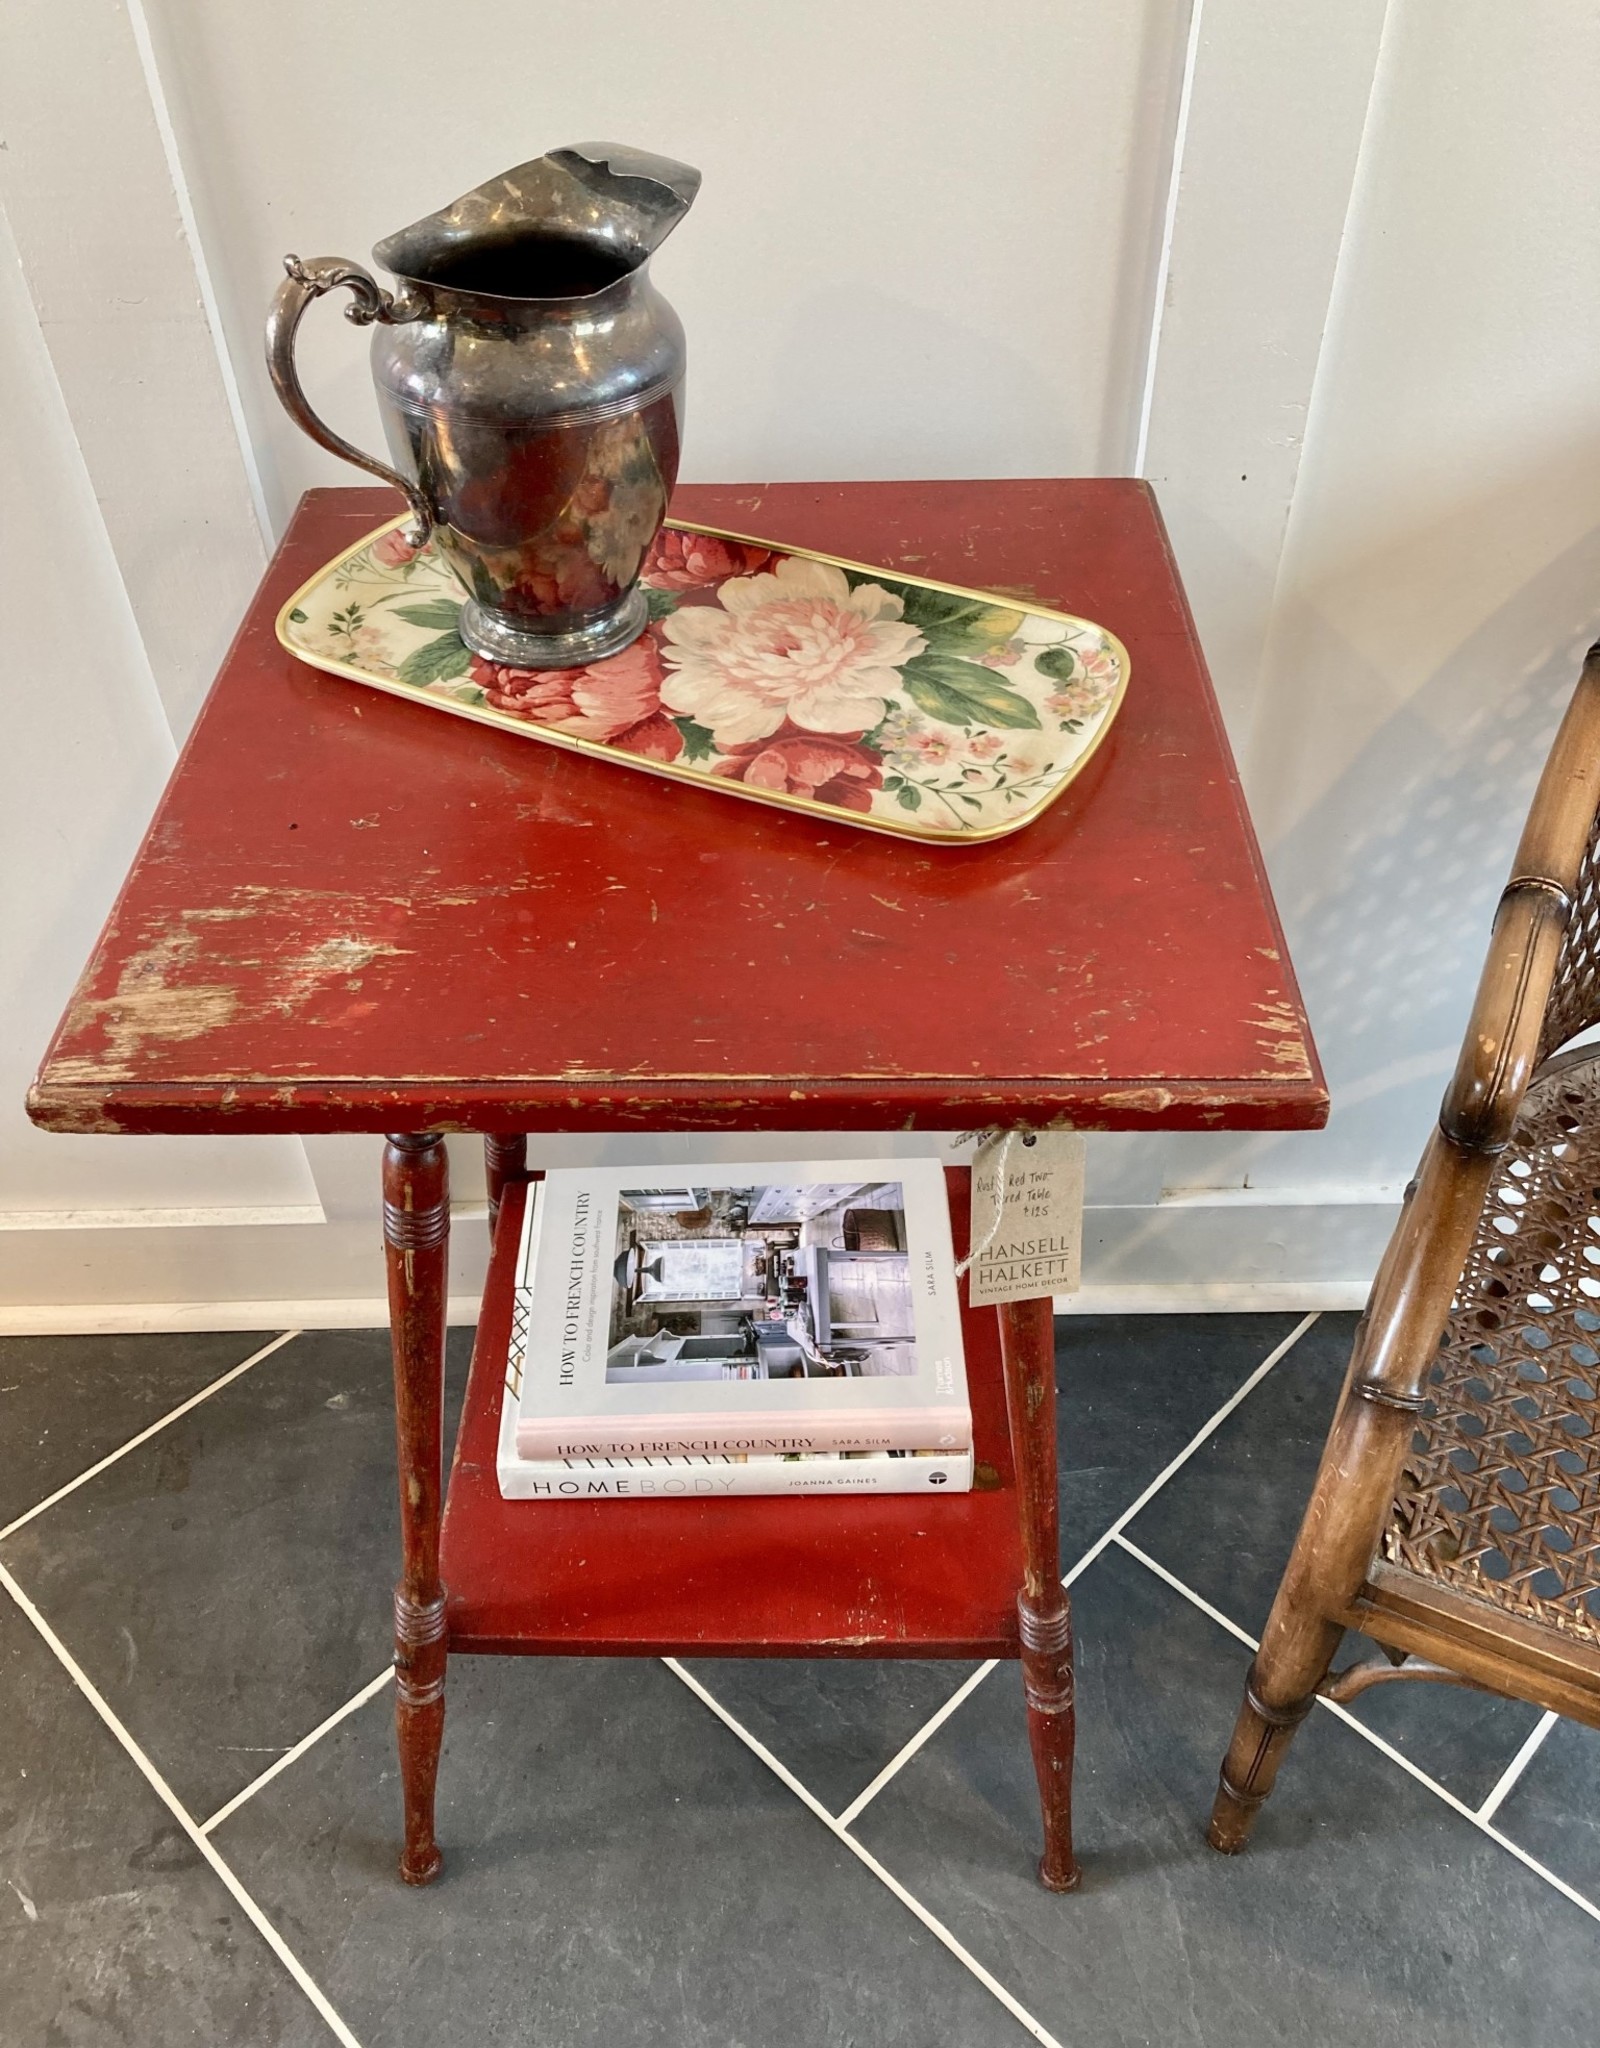 Hansell & Halkett Rustic Red Two-Tiered Table